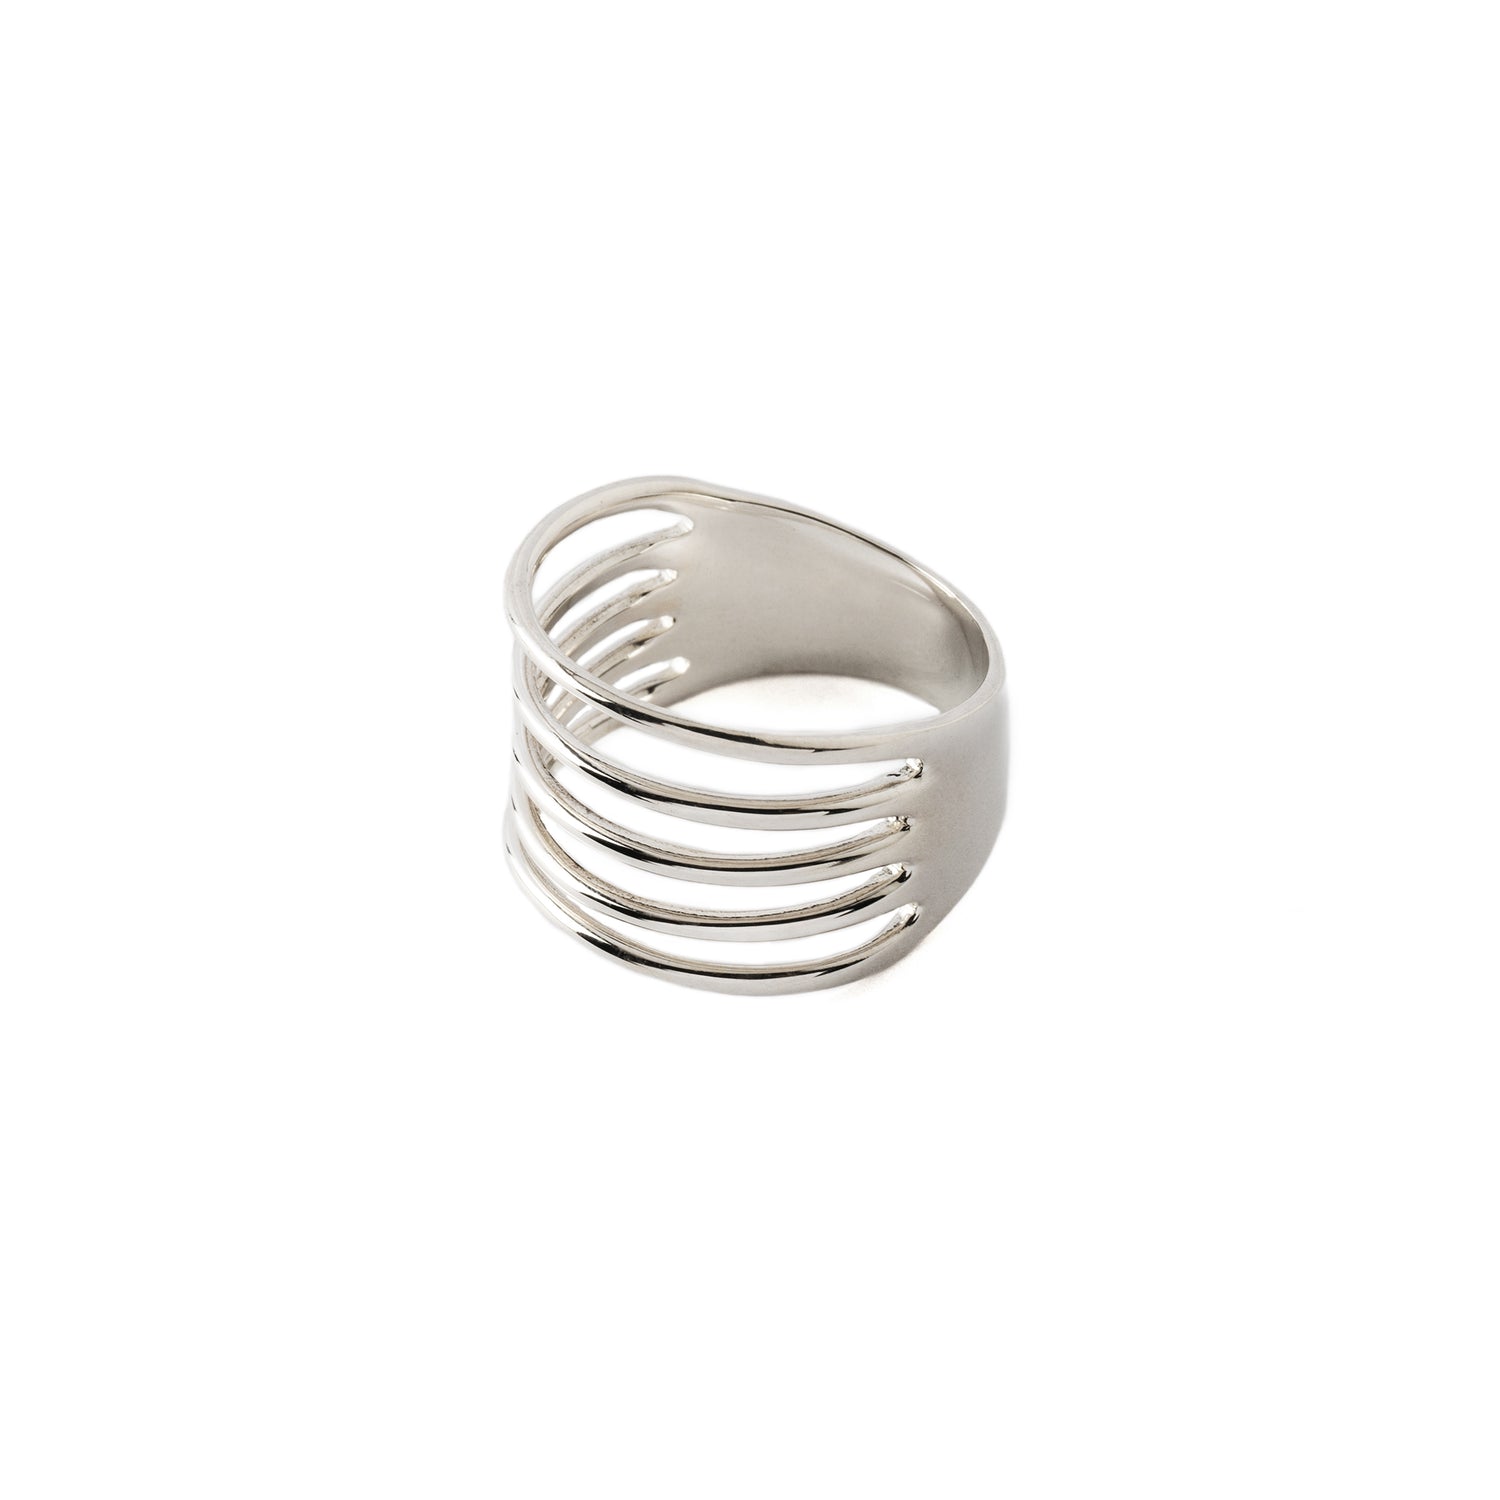 Quintuple Silver Ring right side view